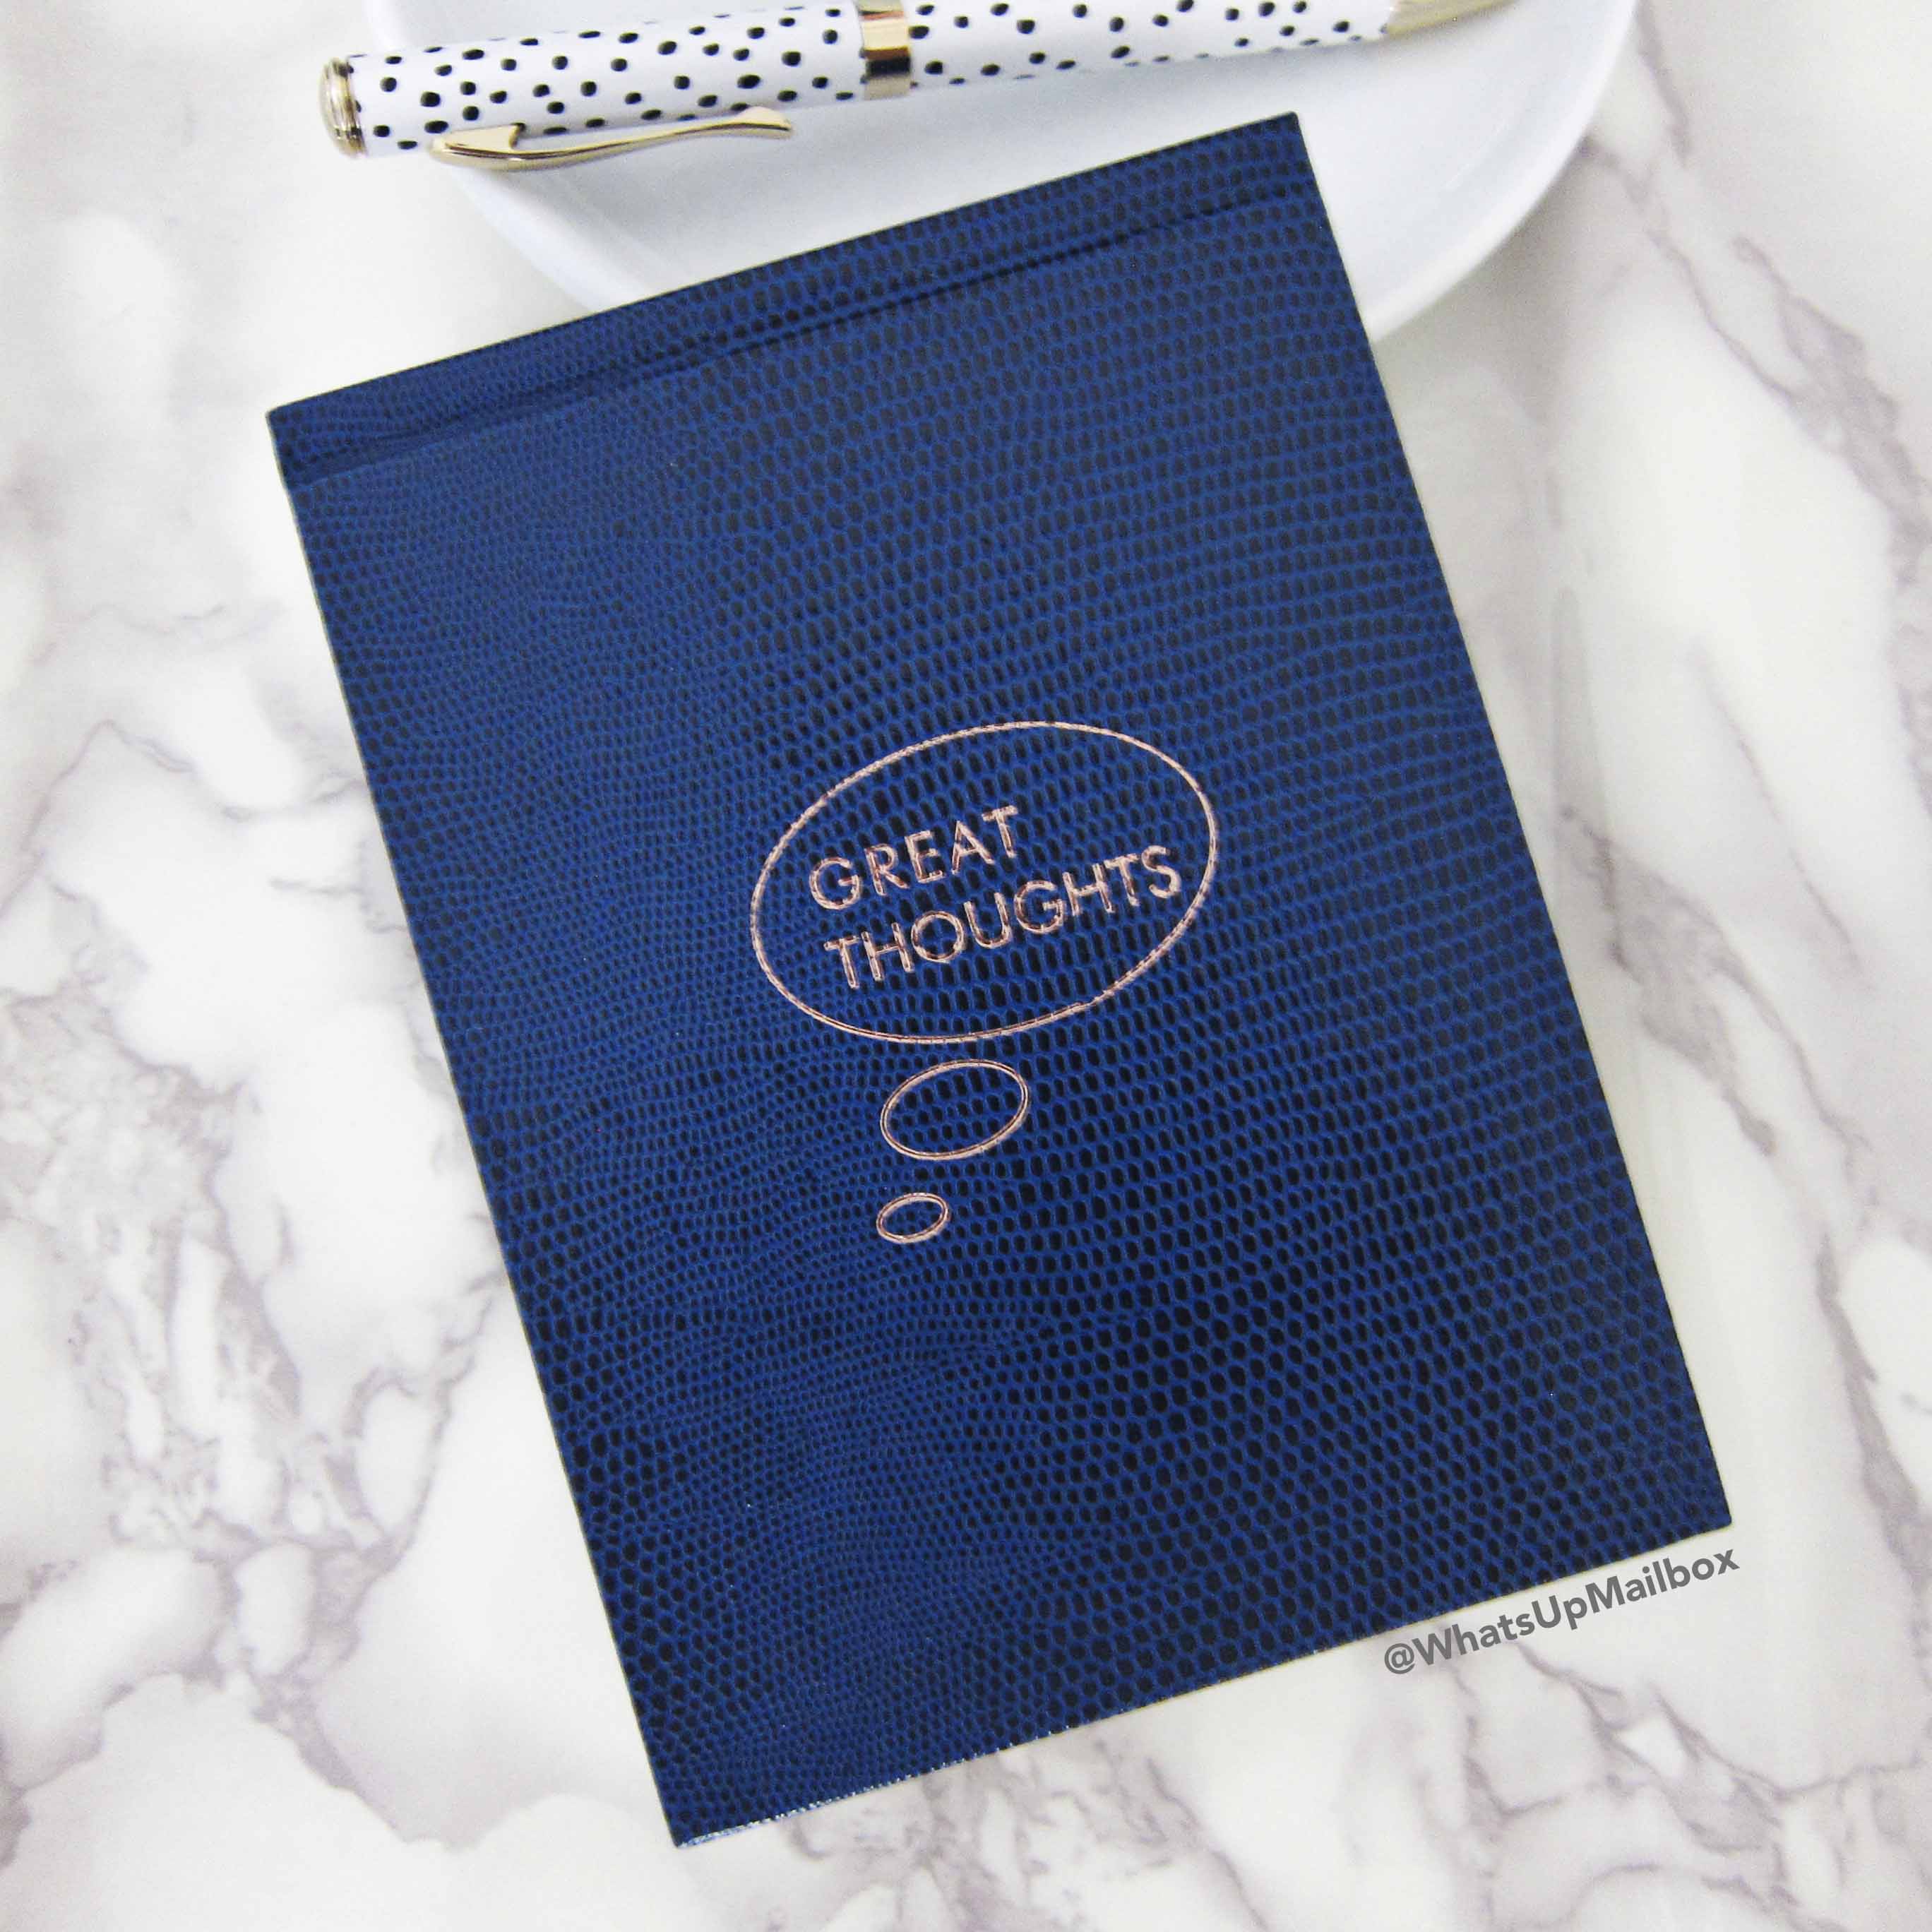 Sloane Stationery Great Thoughts Notepad